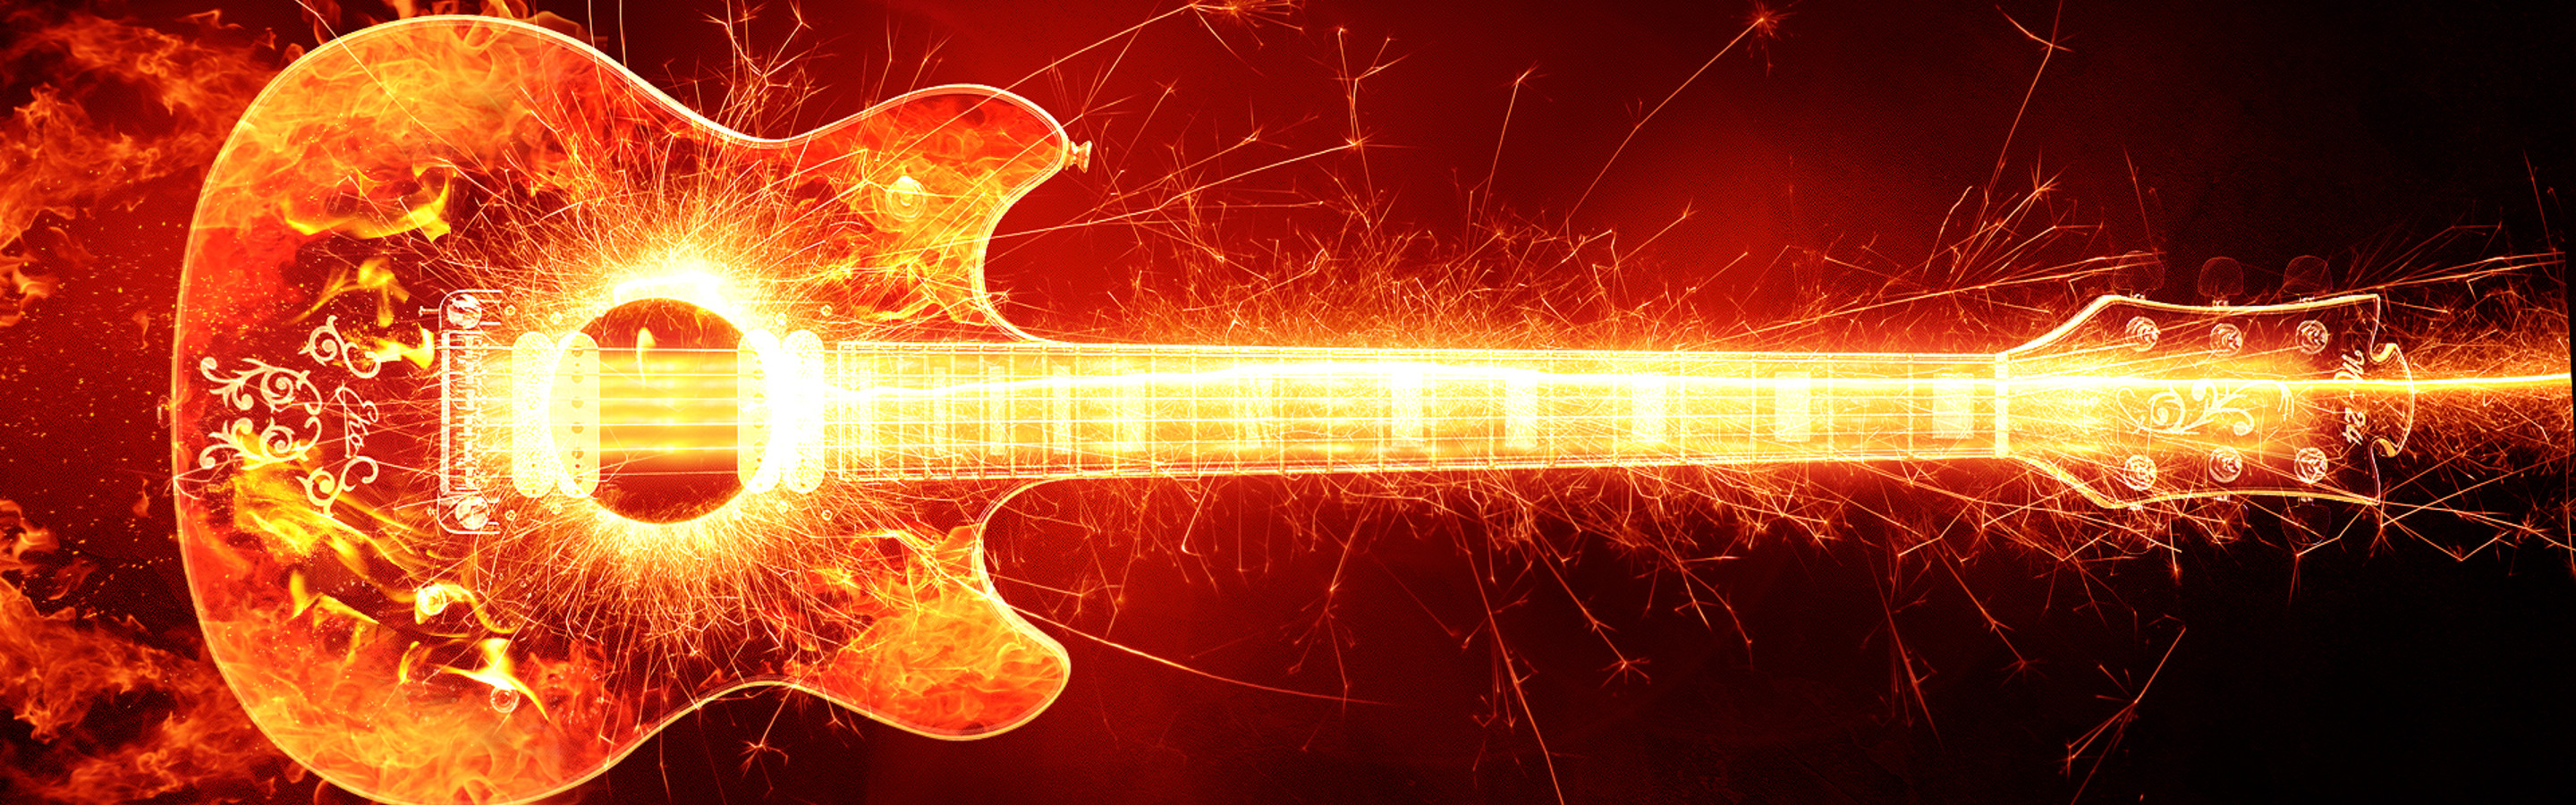 Wallpaper Download 2880x900 Guitar with fire and sparks